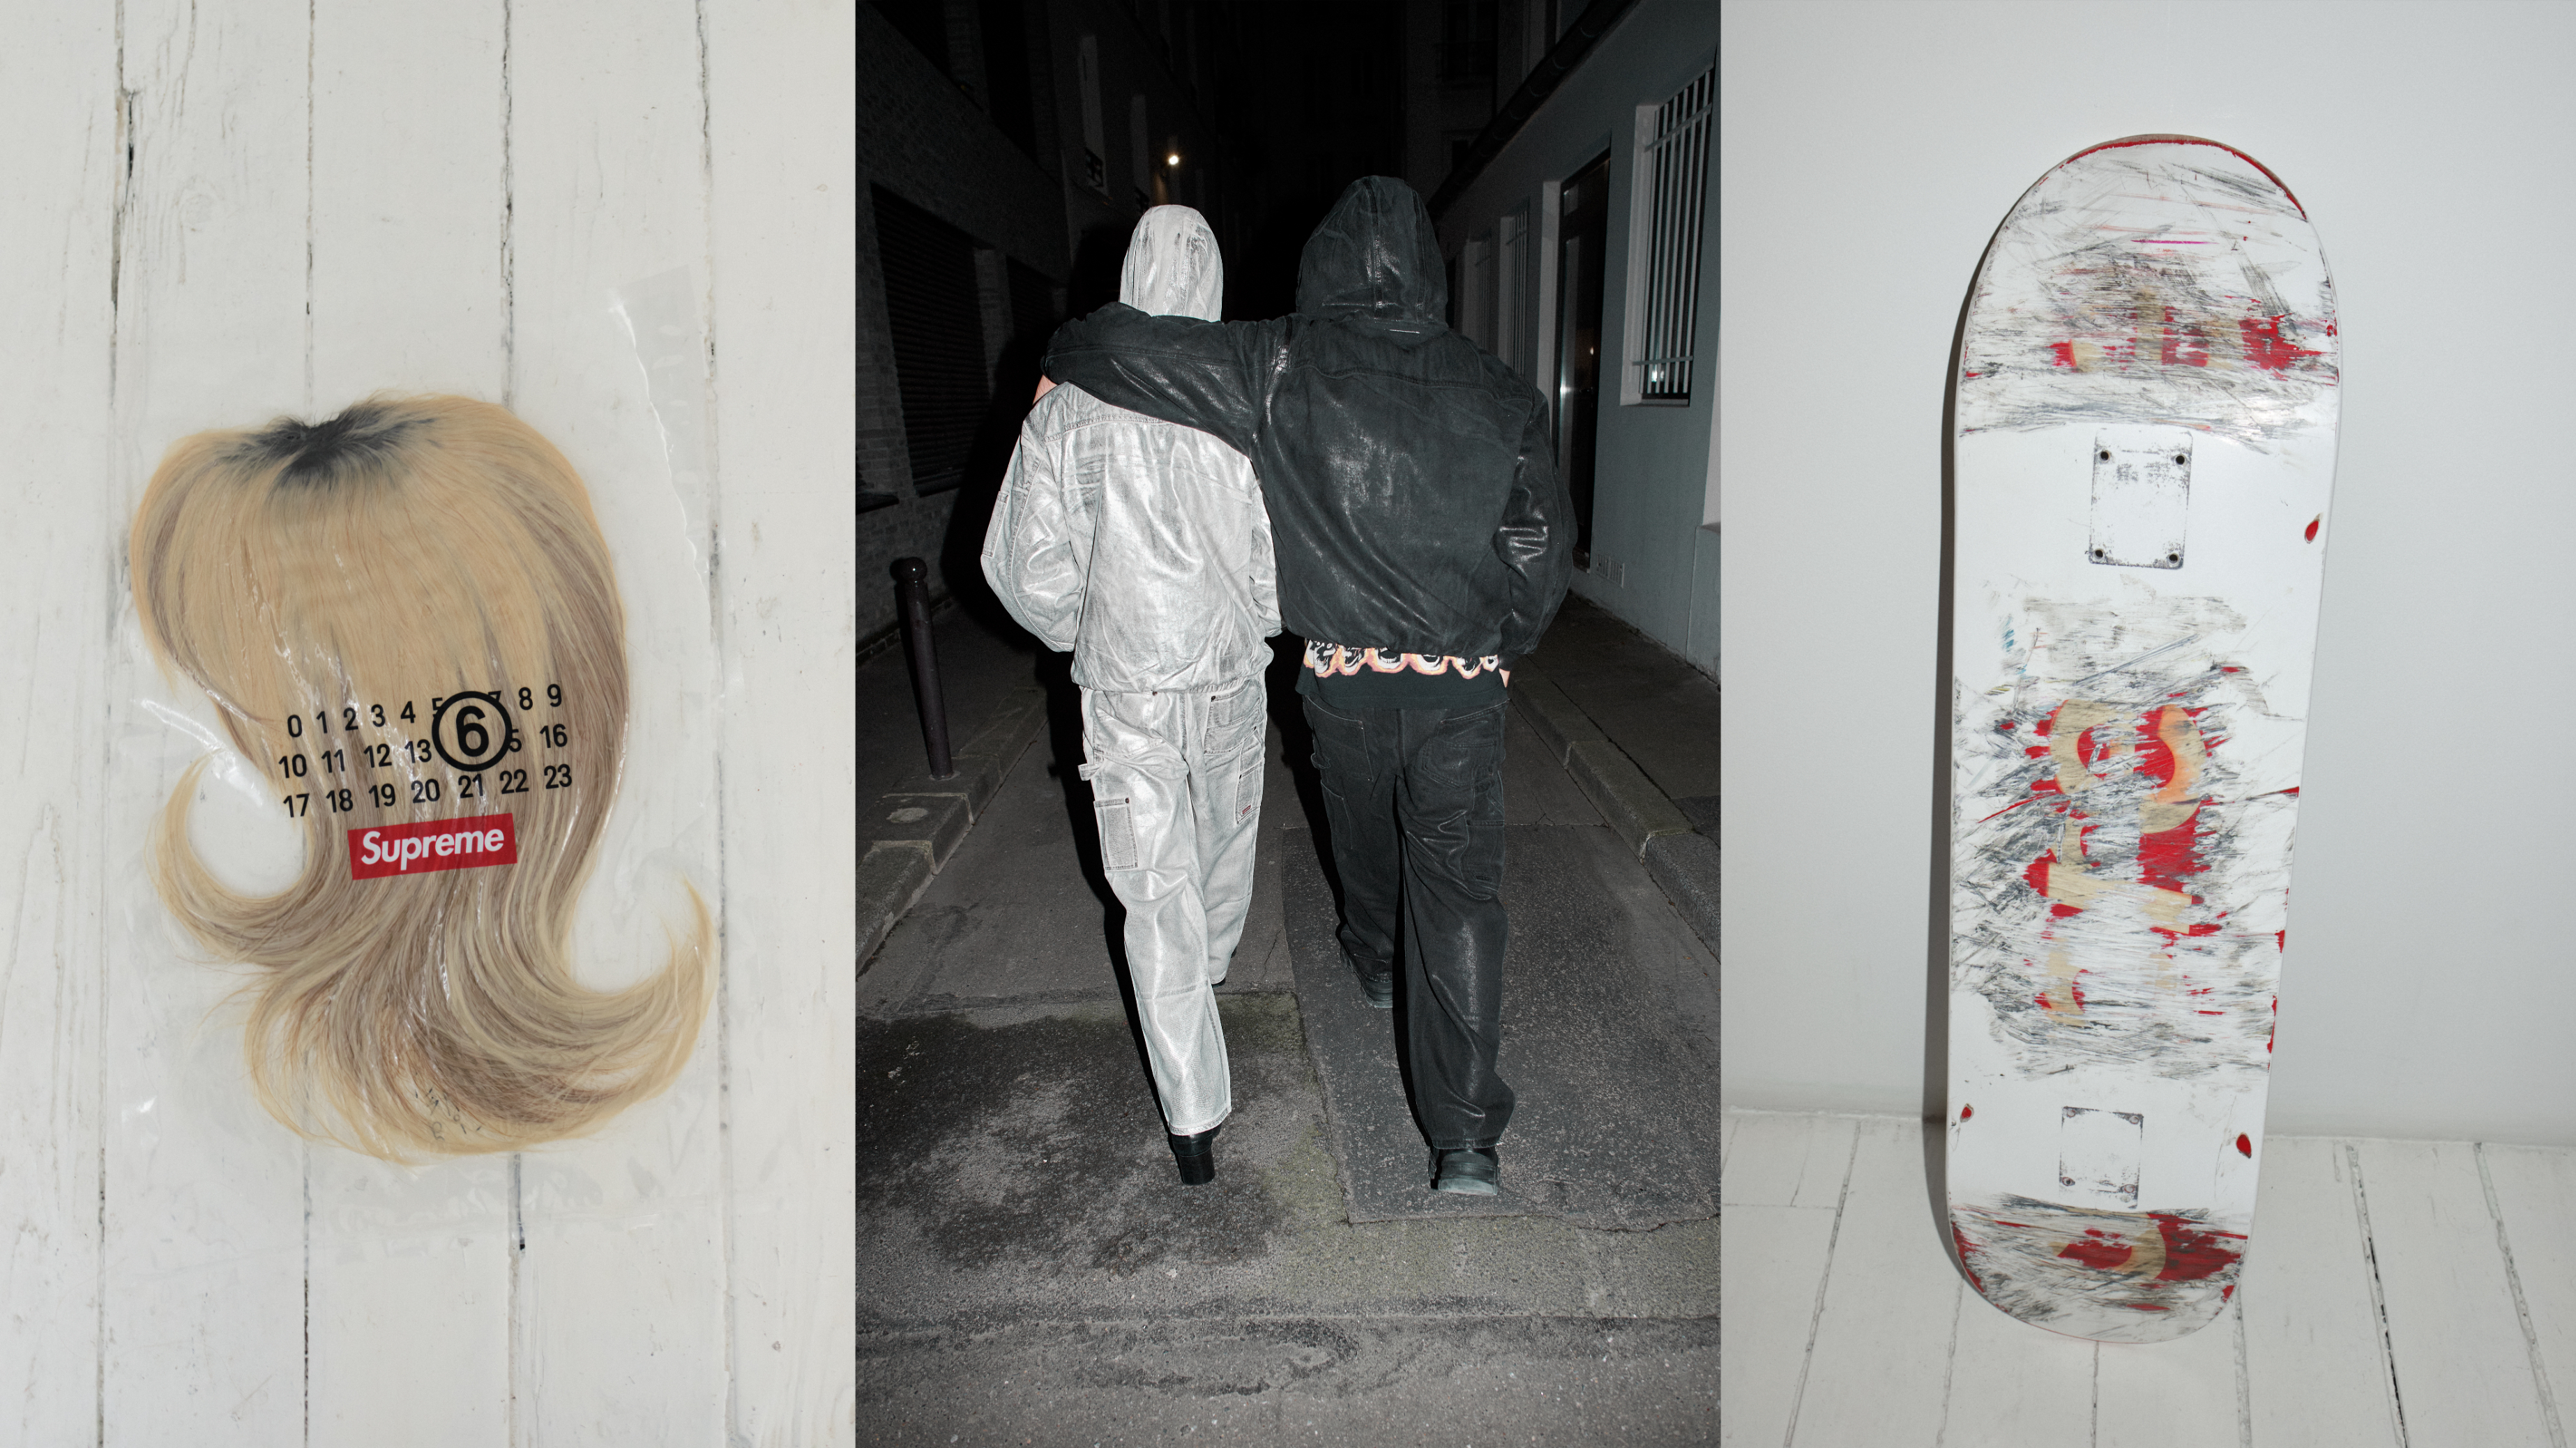 Three images: a wig with a measuring tape, two people in hooded outfits from behind, a worn skateboard